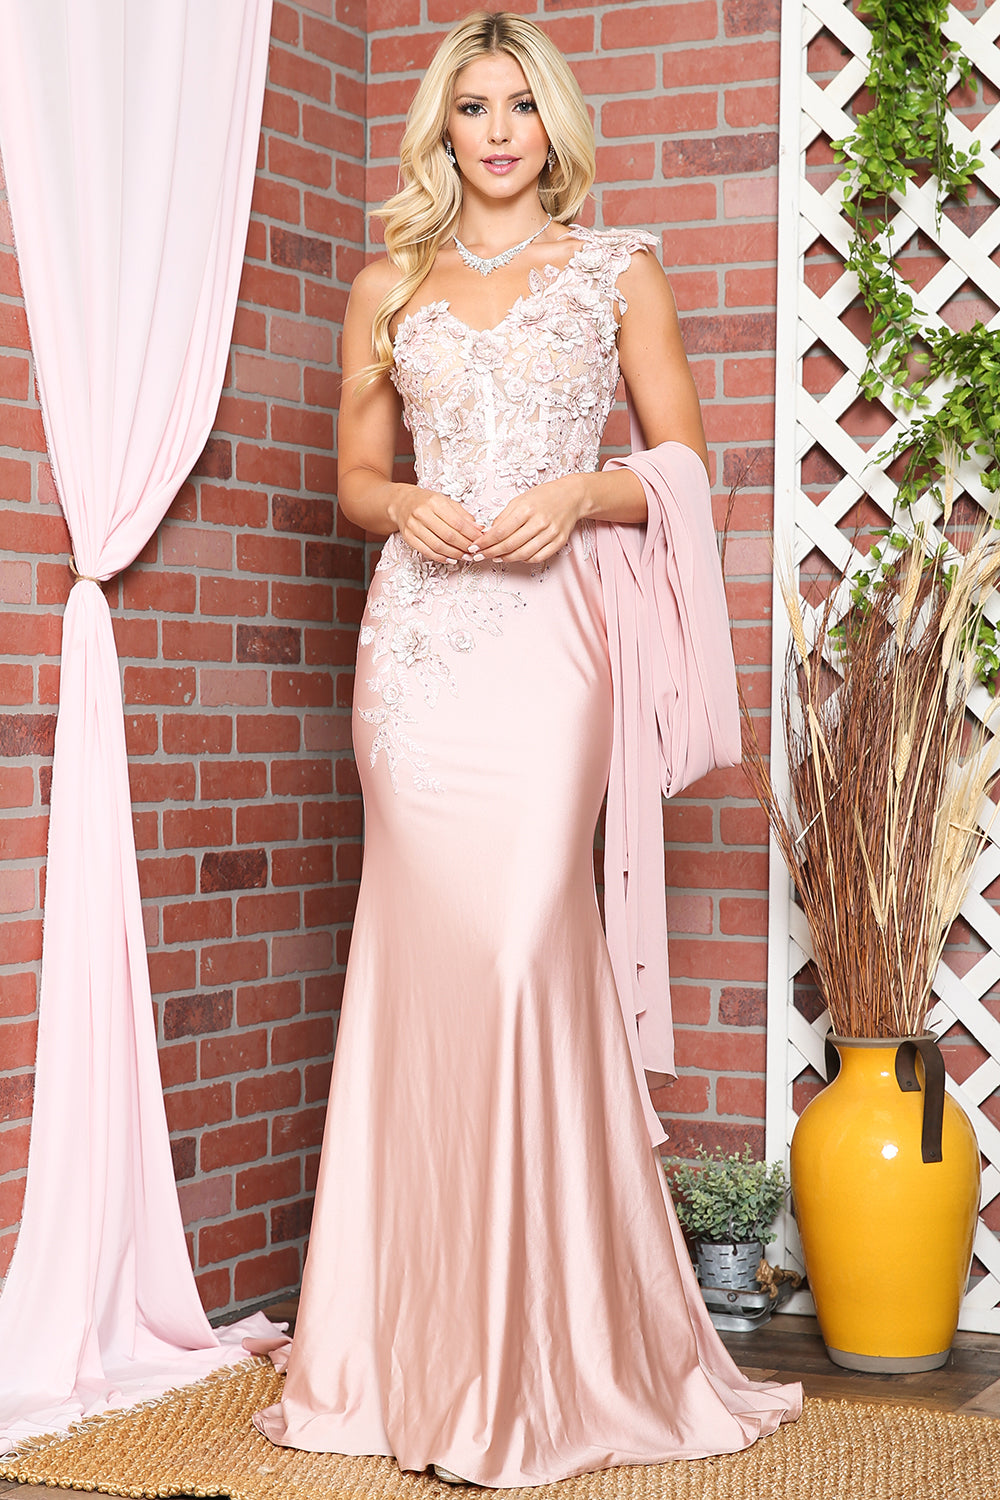 Strap One Shoulder 3D Floral Applique Mermaid Long Evening & Prom Dress AC388 Elsy Style Prom Dress